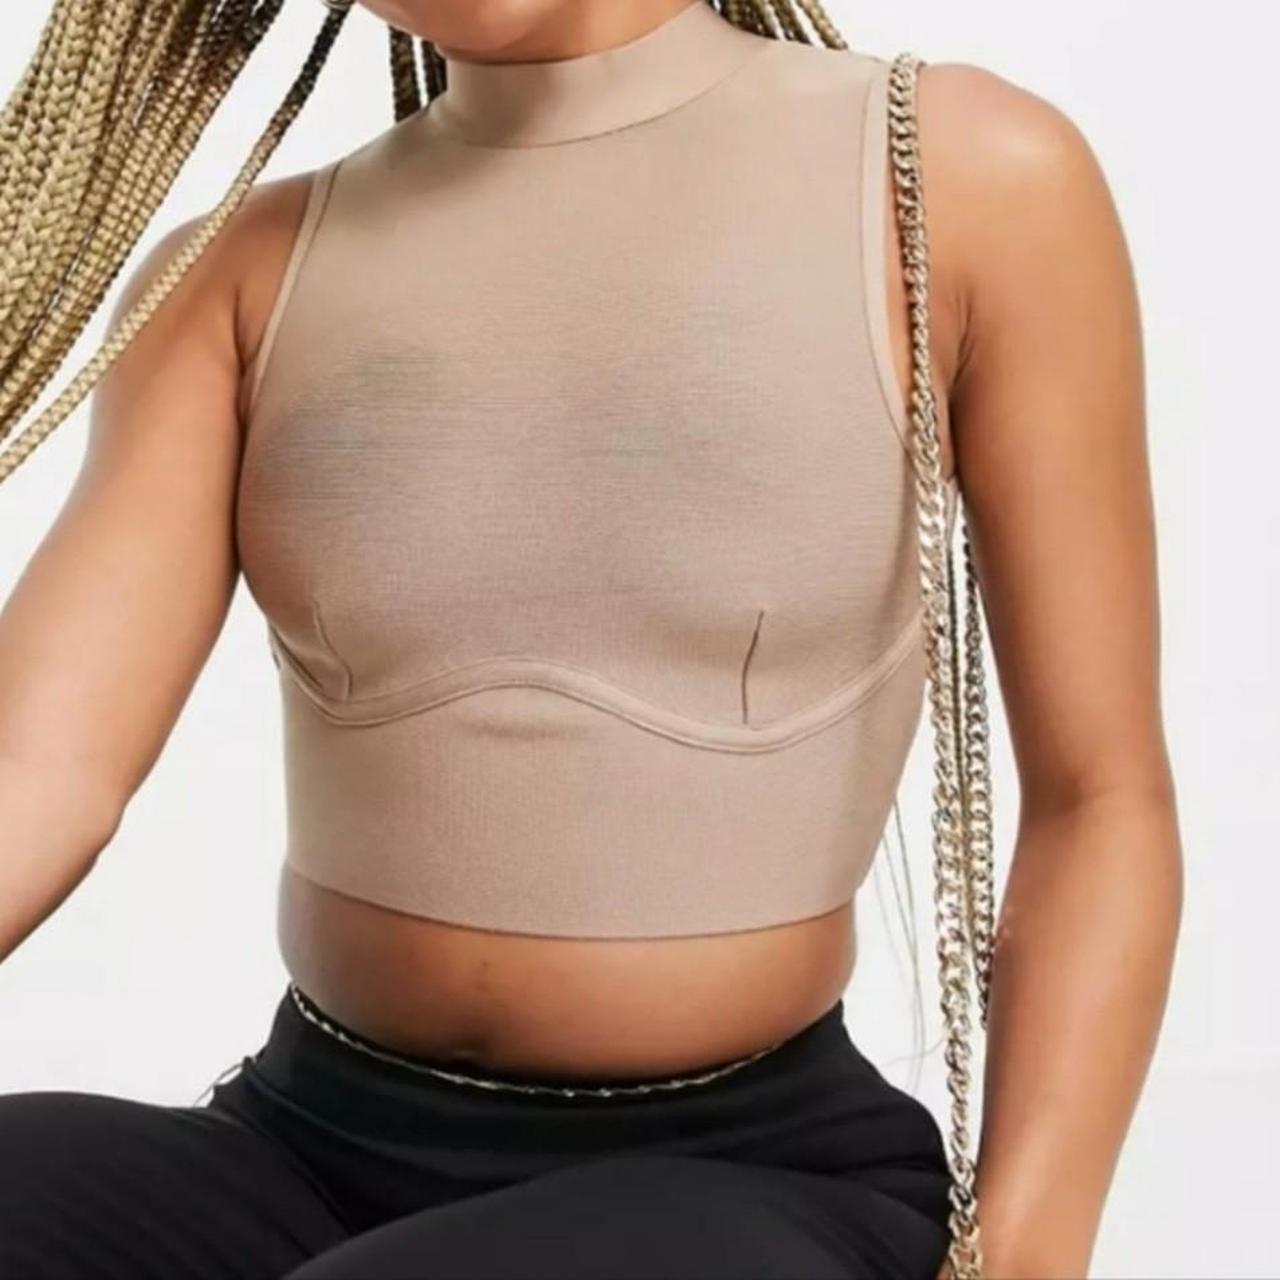 Product Image 3 - High neck crop top
Worn once
Size